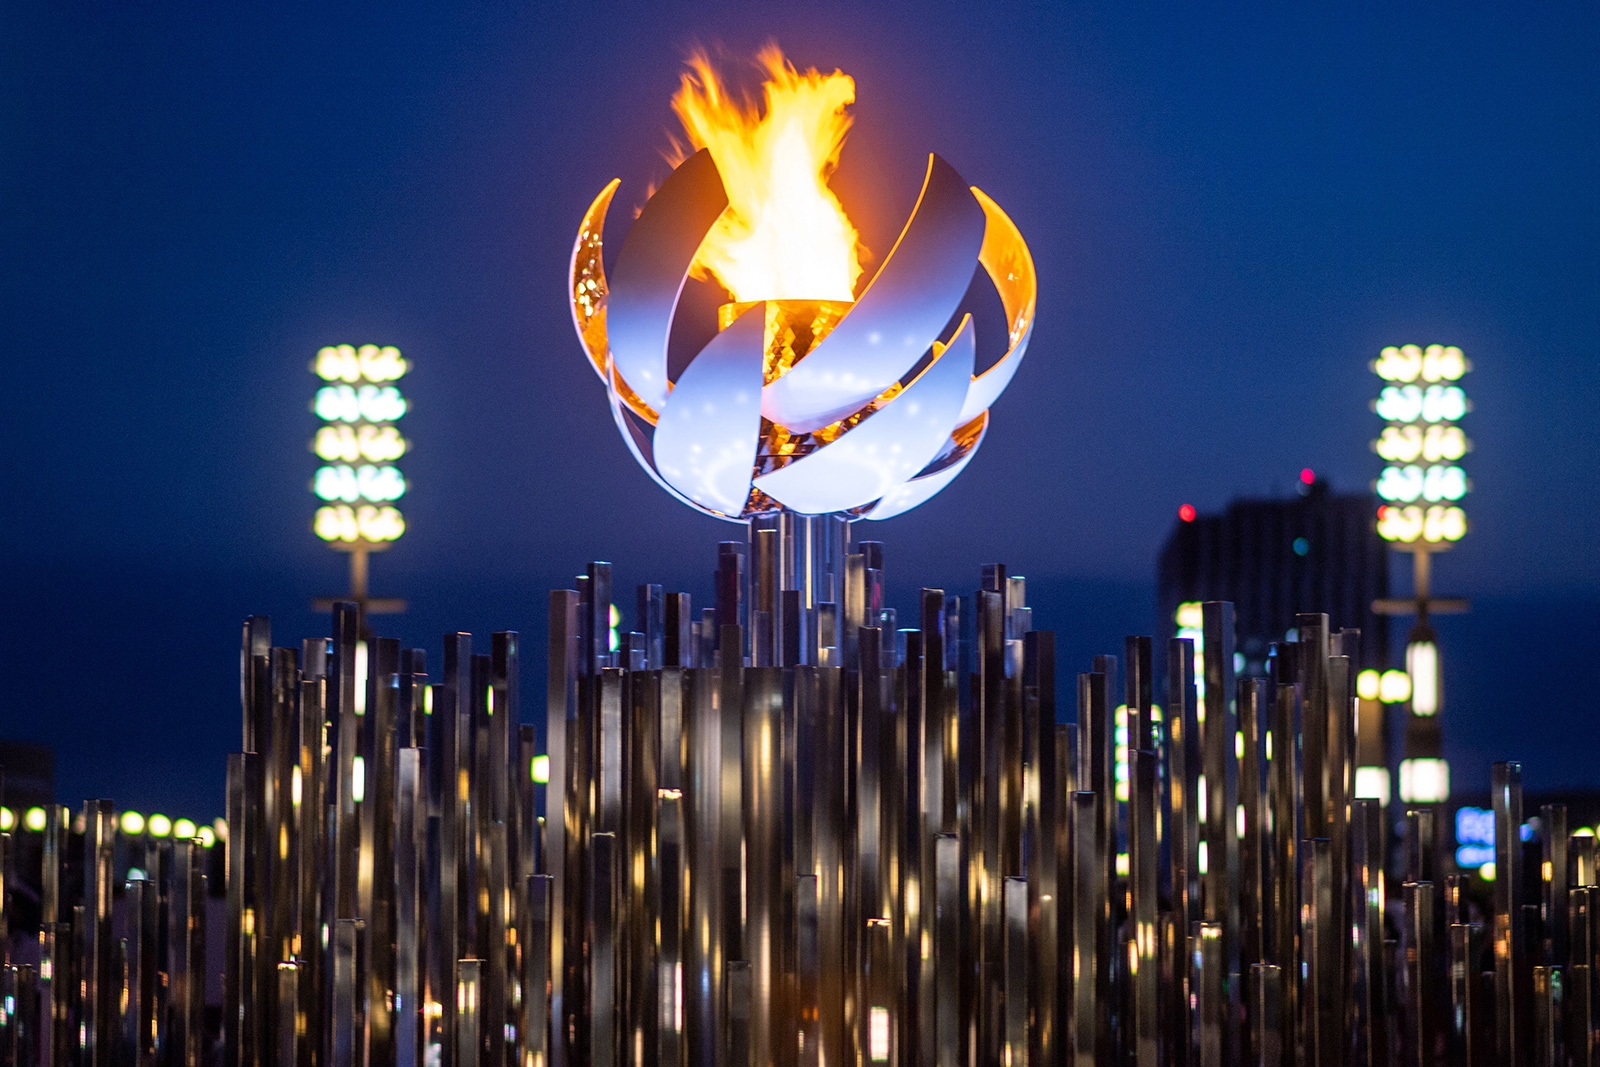 The Olympic flame is seen burning on the cauldron at Ariake Yume-no-Ohashi Bridge in Tokyo on July 25.